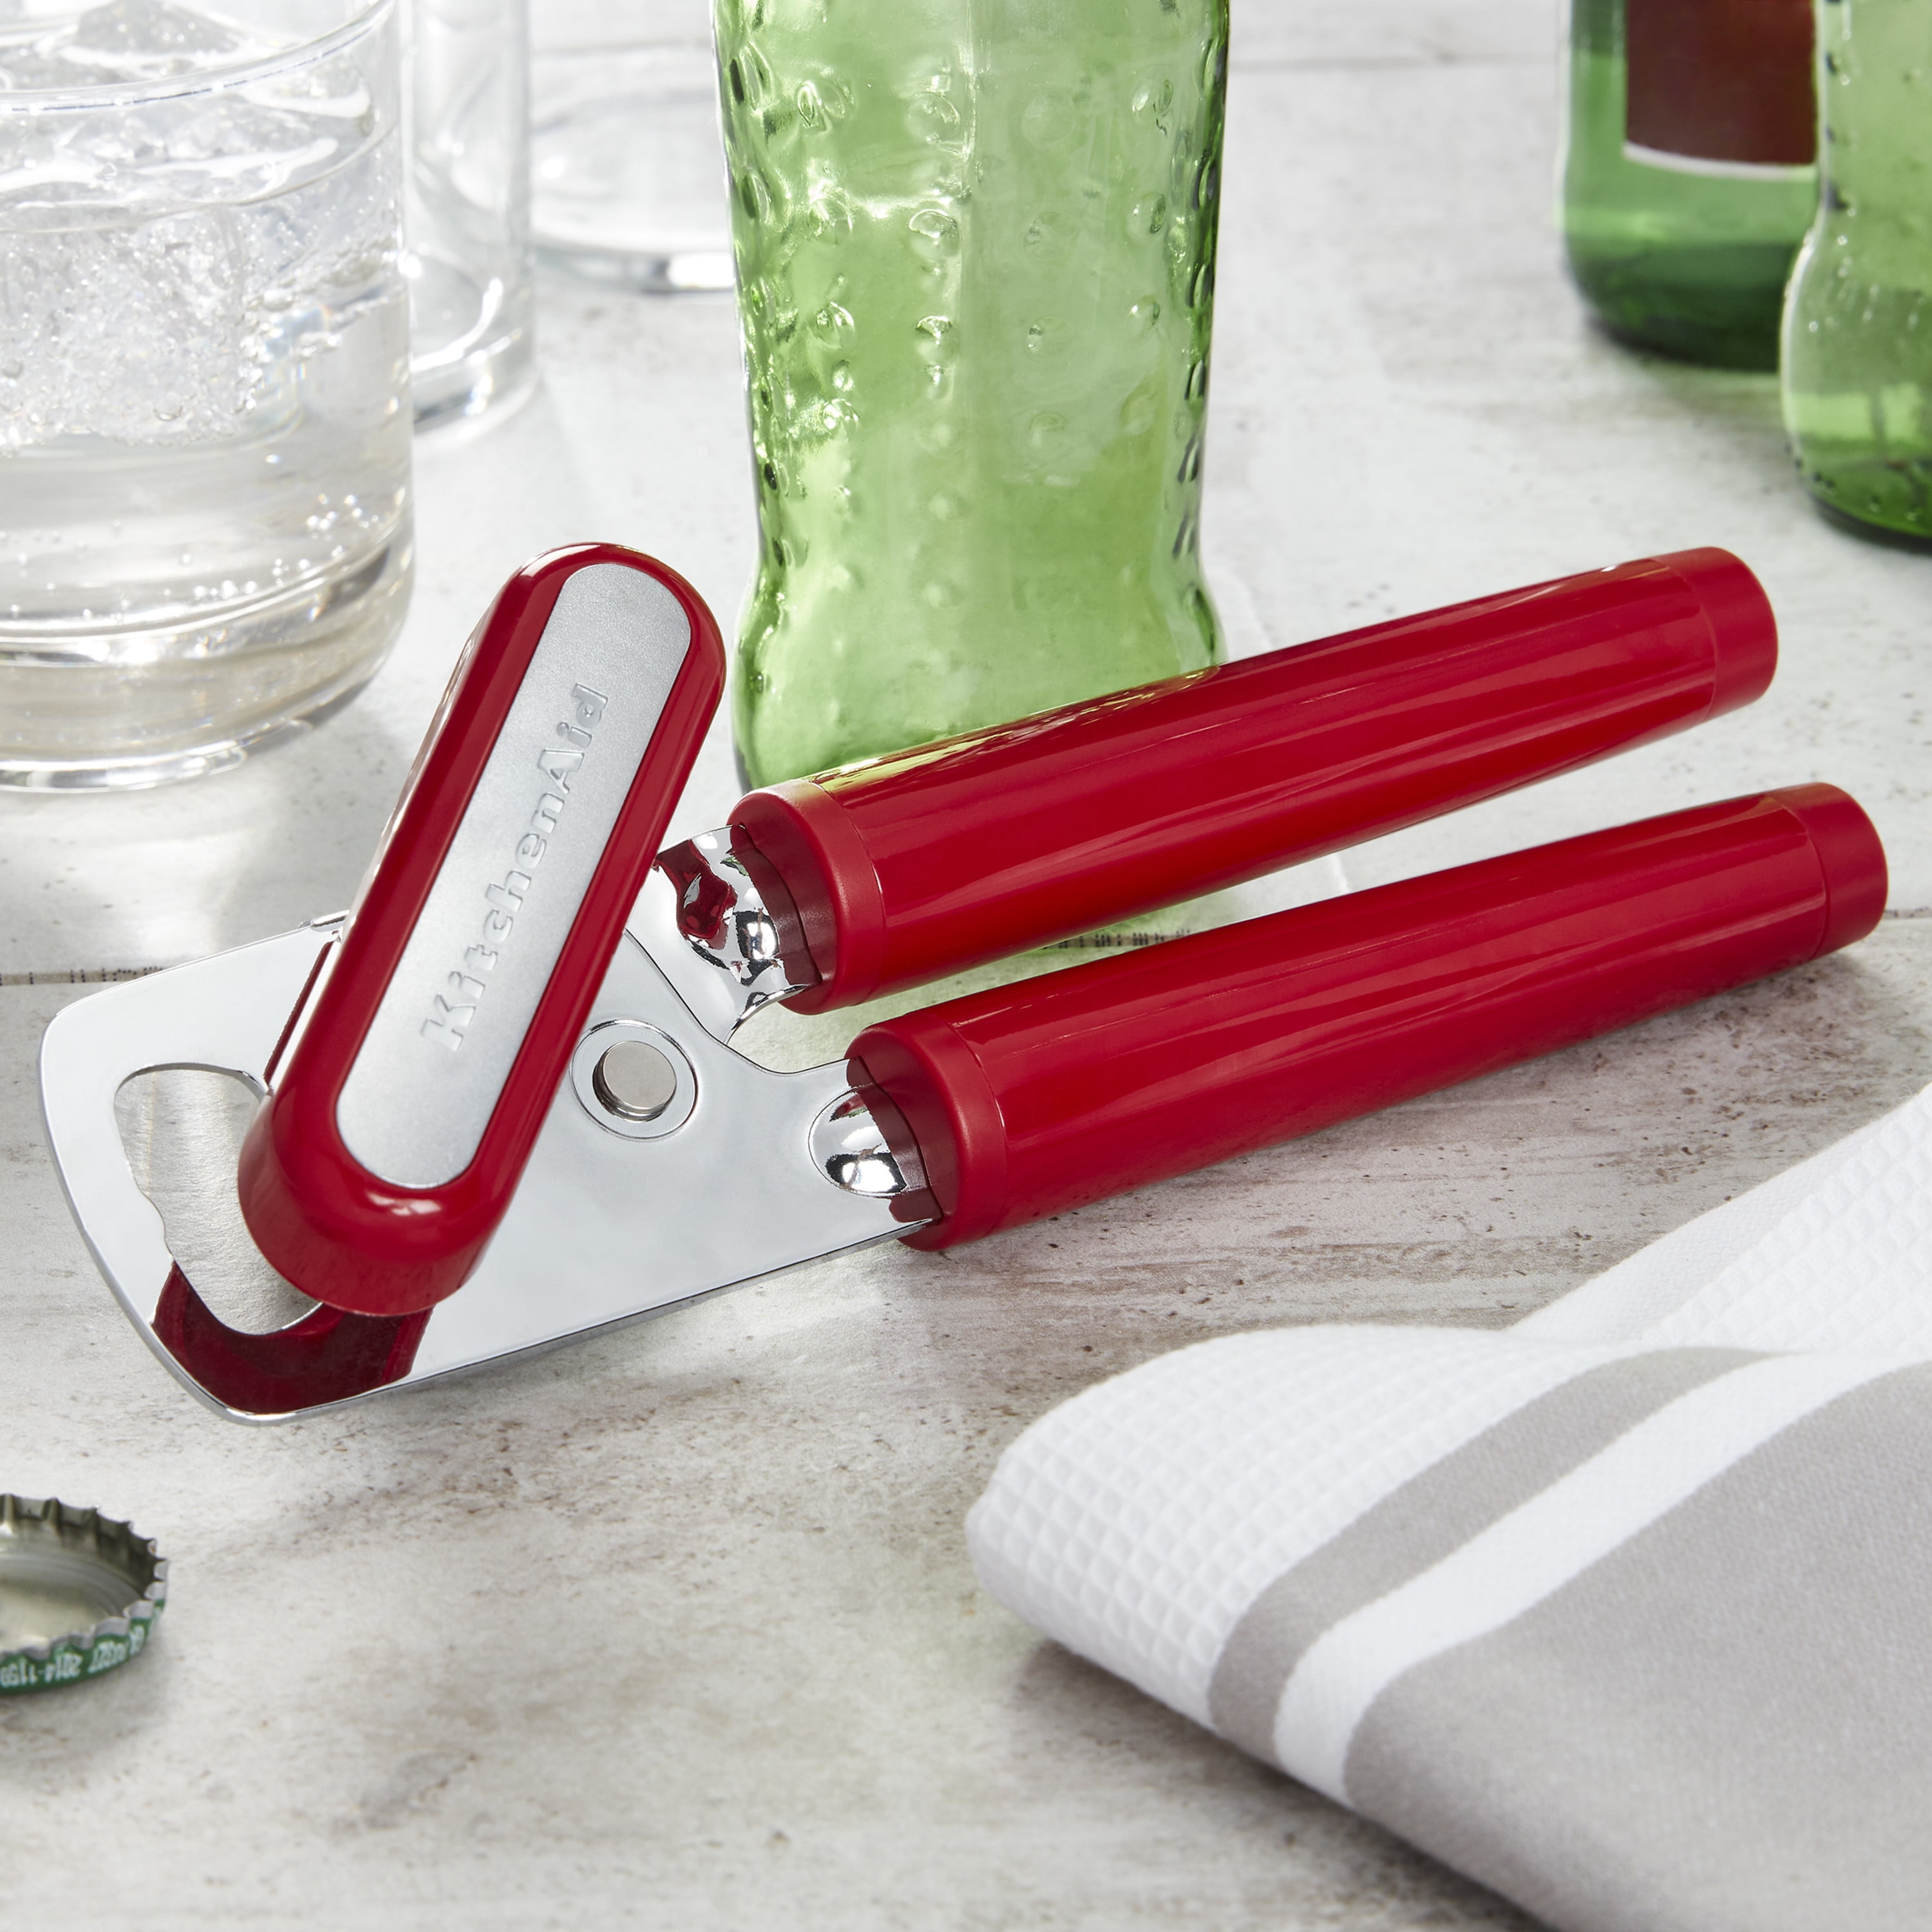 Empire Red Cuisinart Deluxe Electric Can Opener , Empire Red Kitchenaid ,  Empire Red Appliances, Heavy Duty Can Opener 